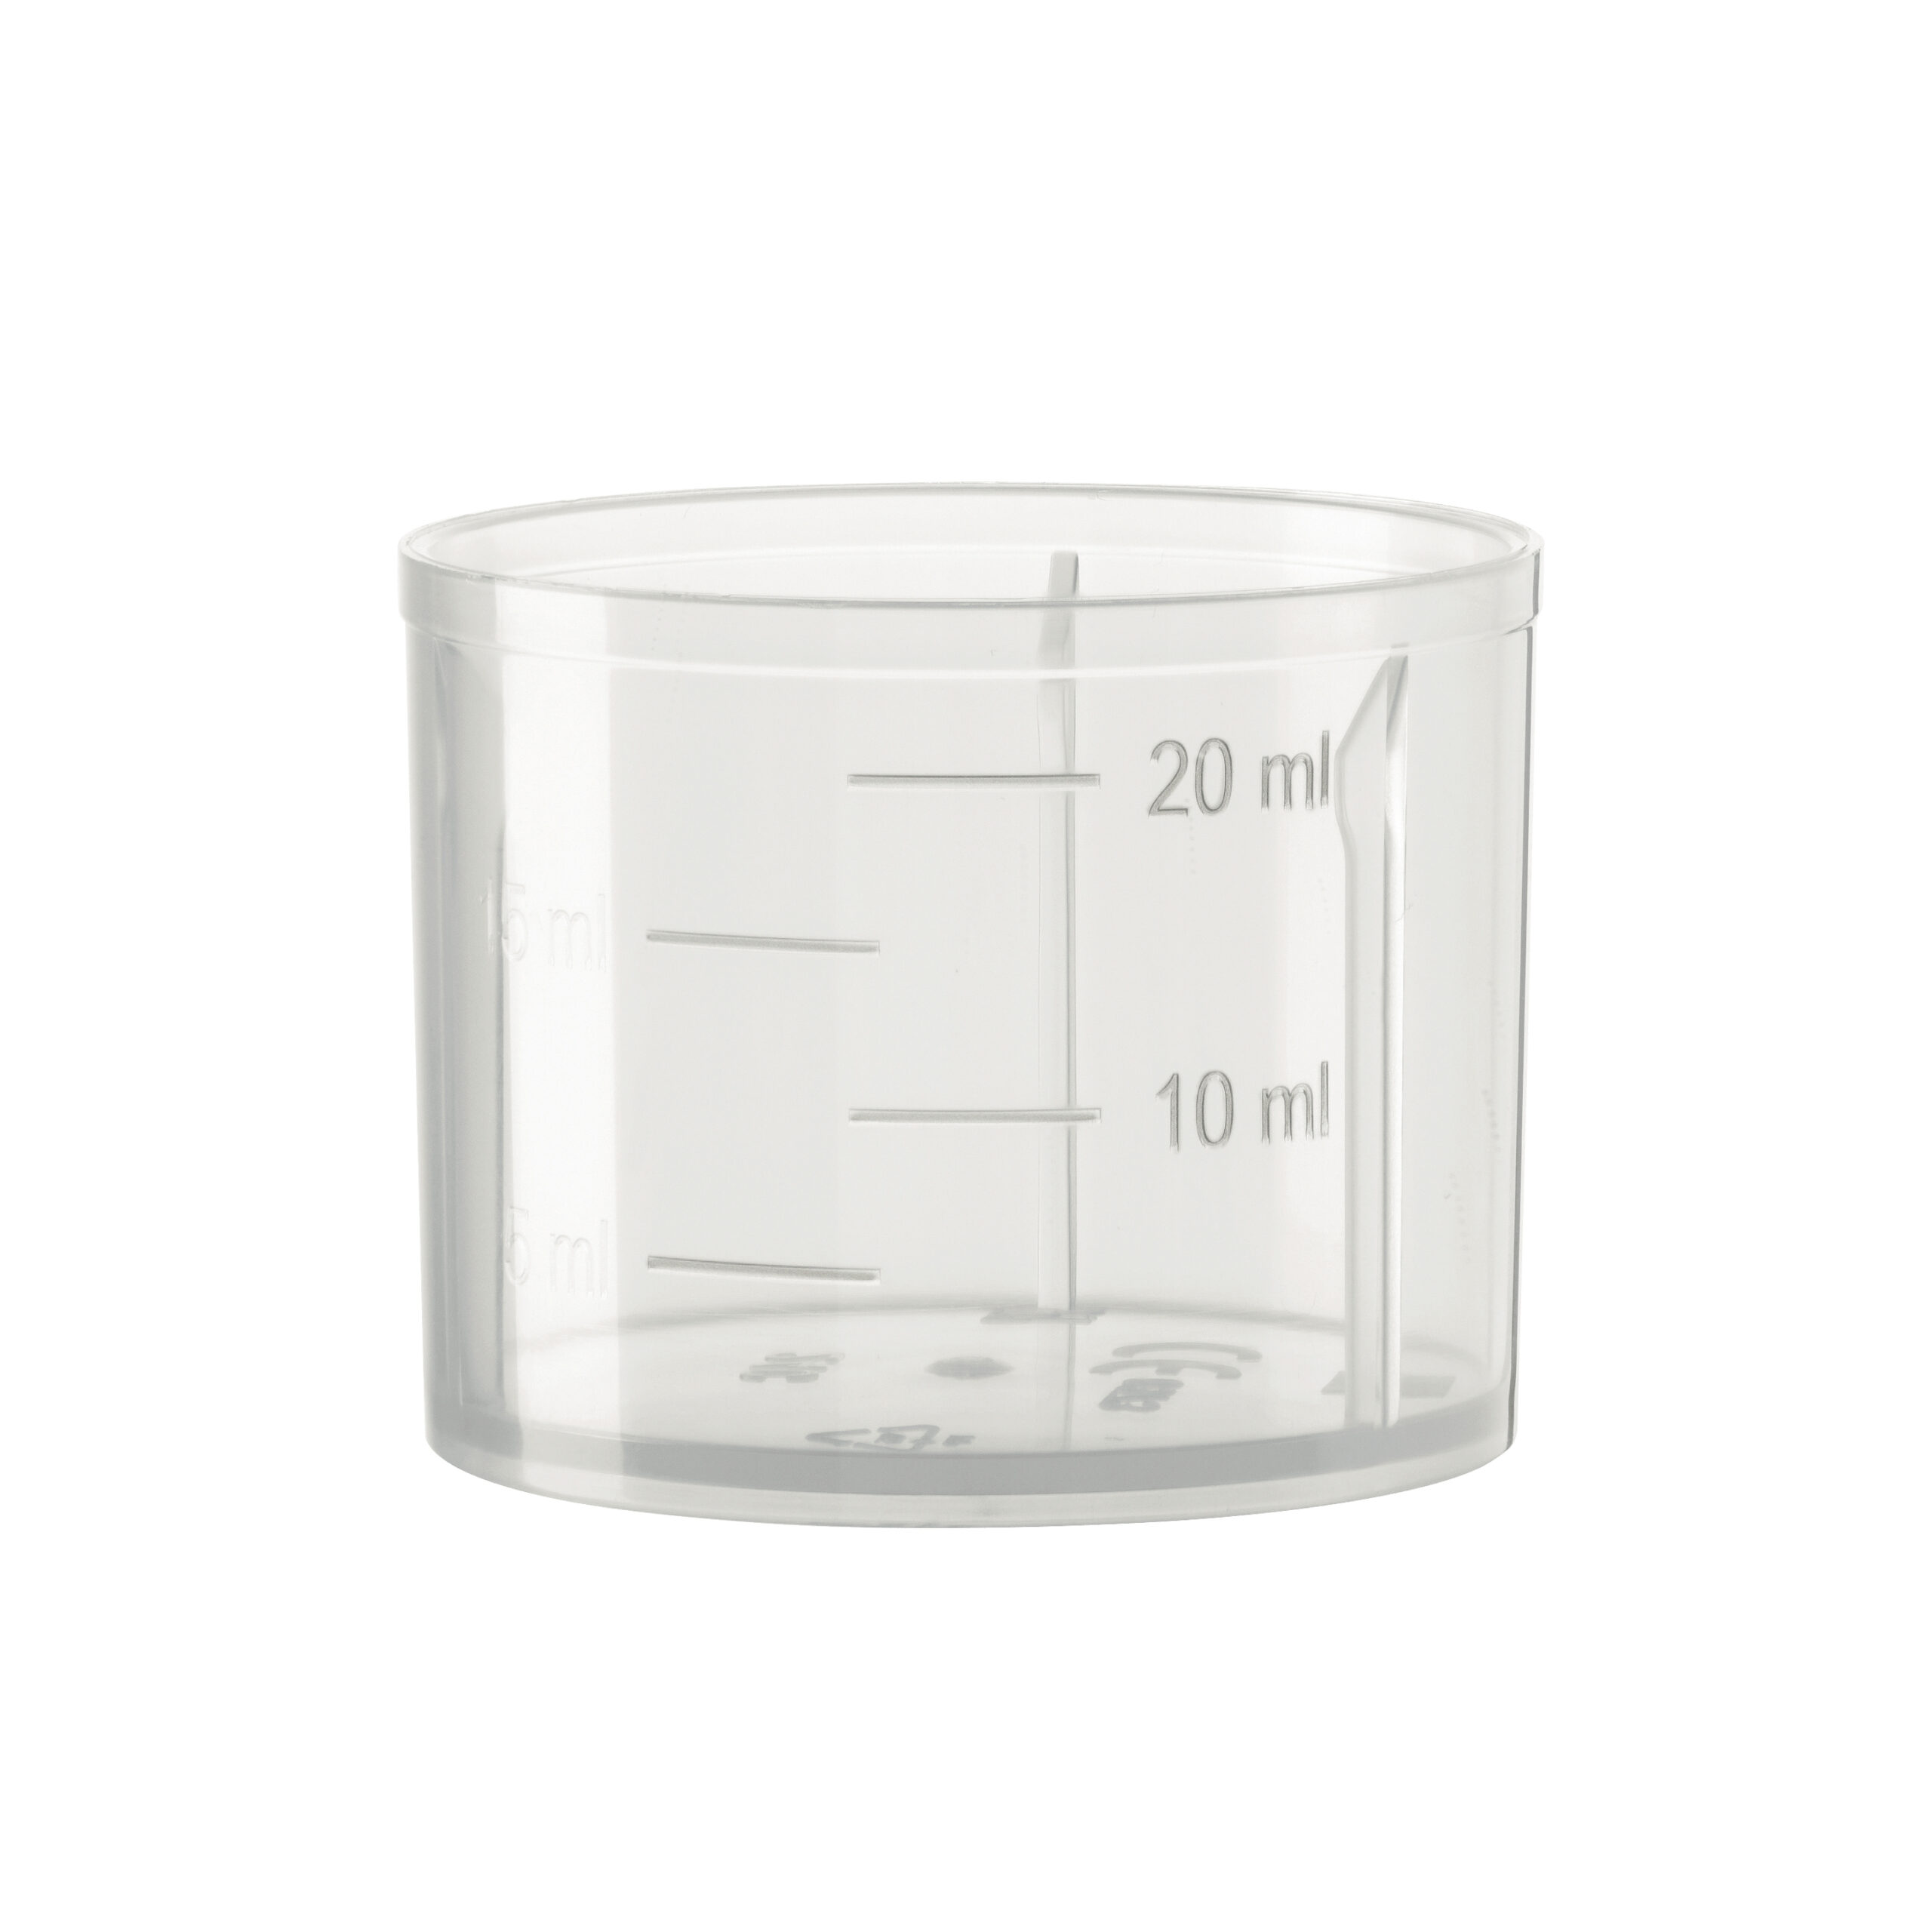 PPF28 Natural Dosing Cup 20mm